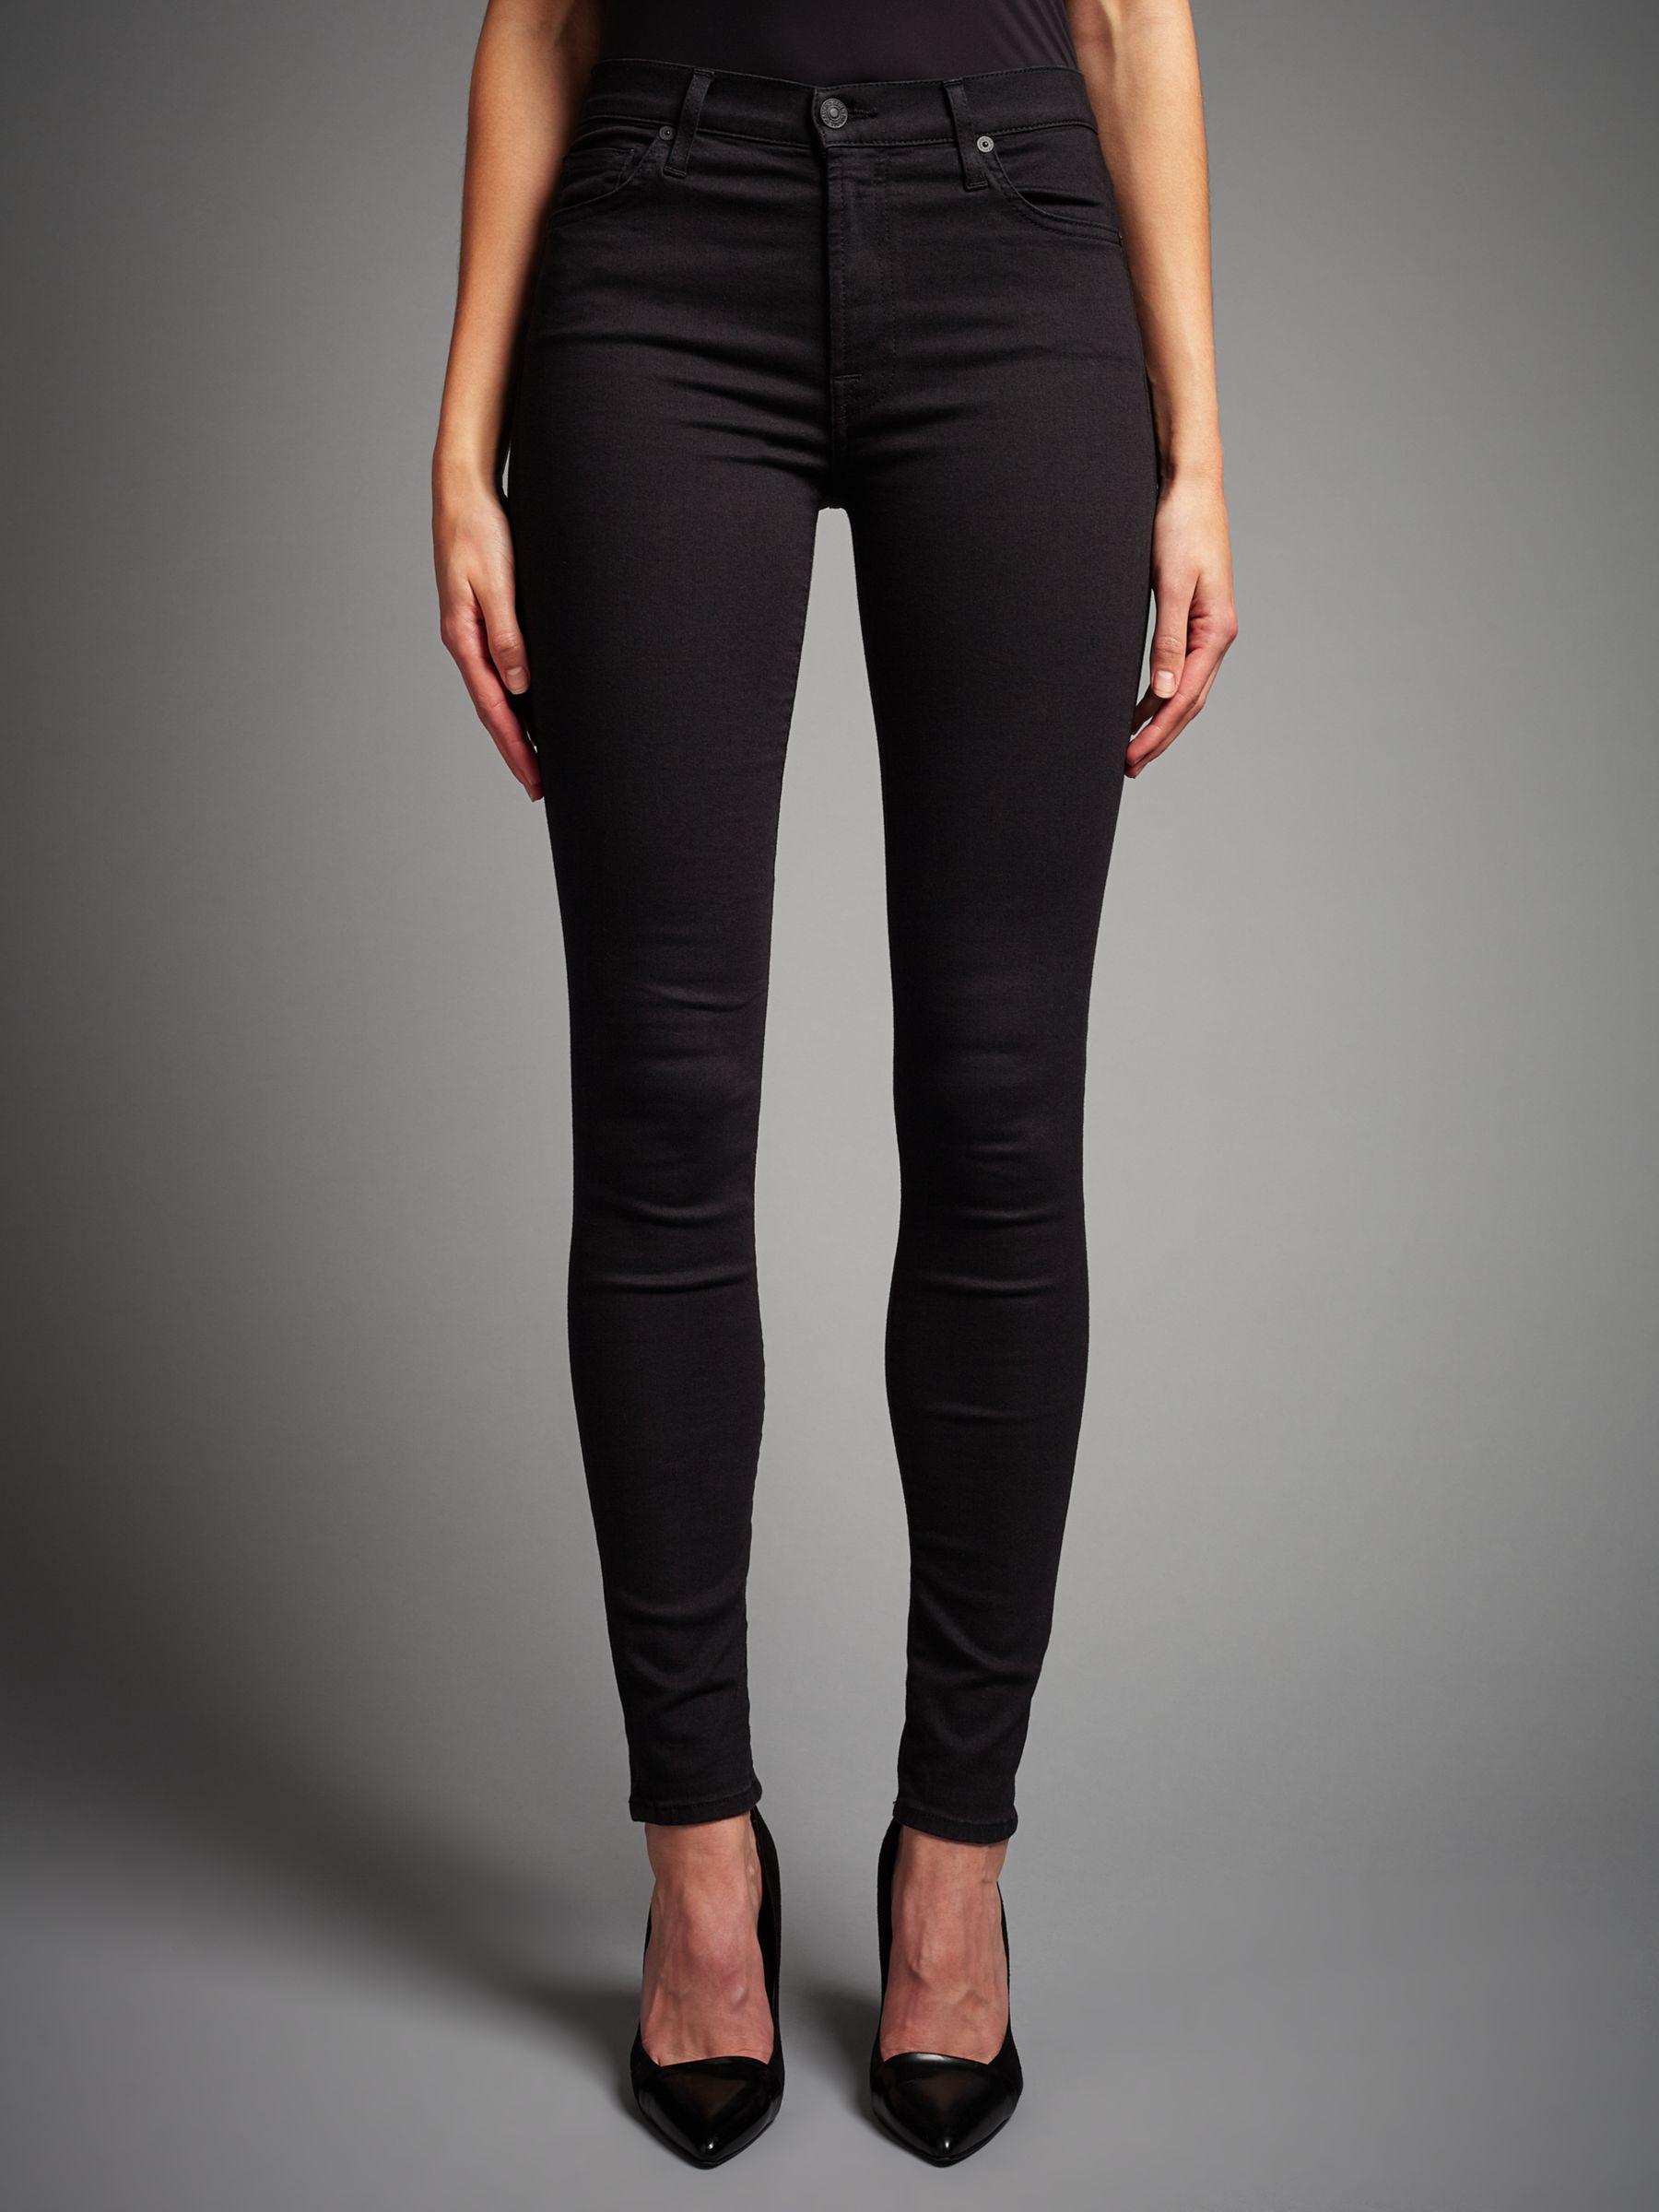 7 For All Mankind High-Waist Skinny Jeans, Phoenix Black at John Lewis ...